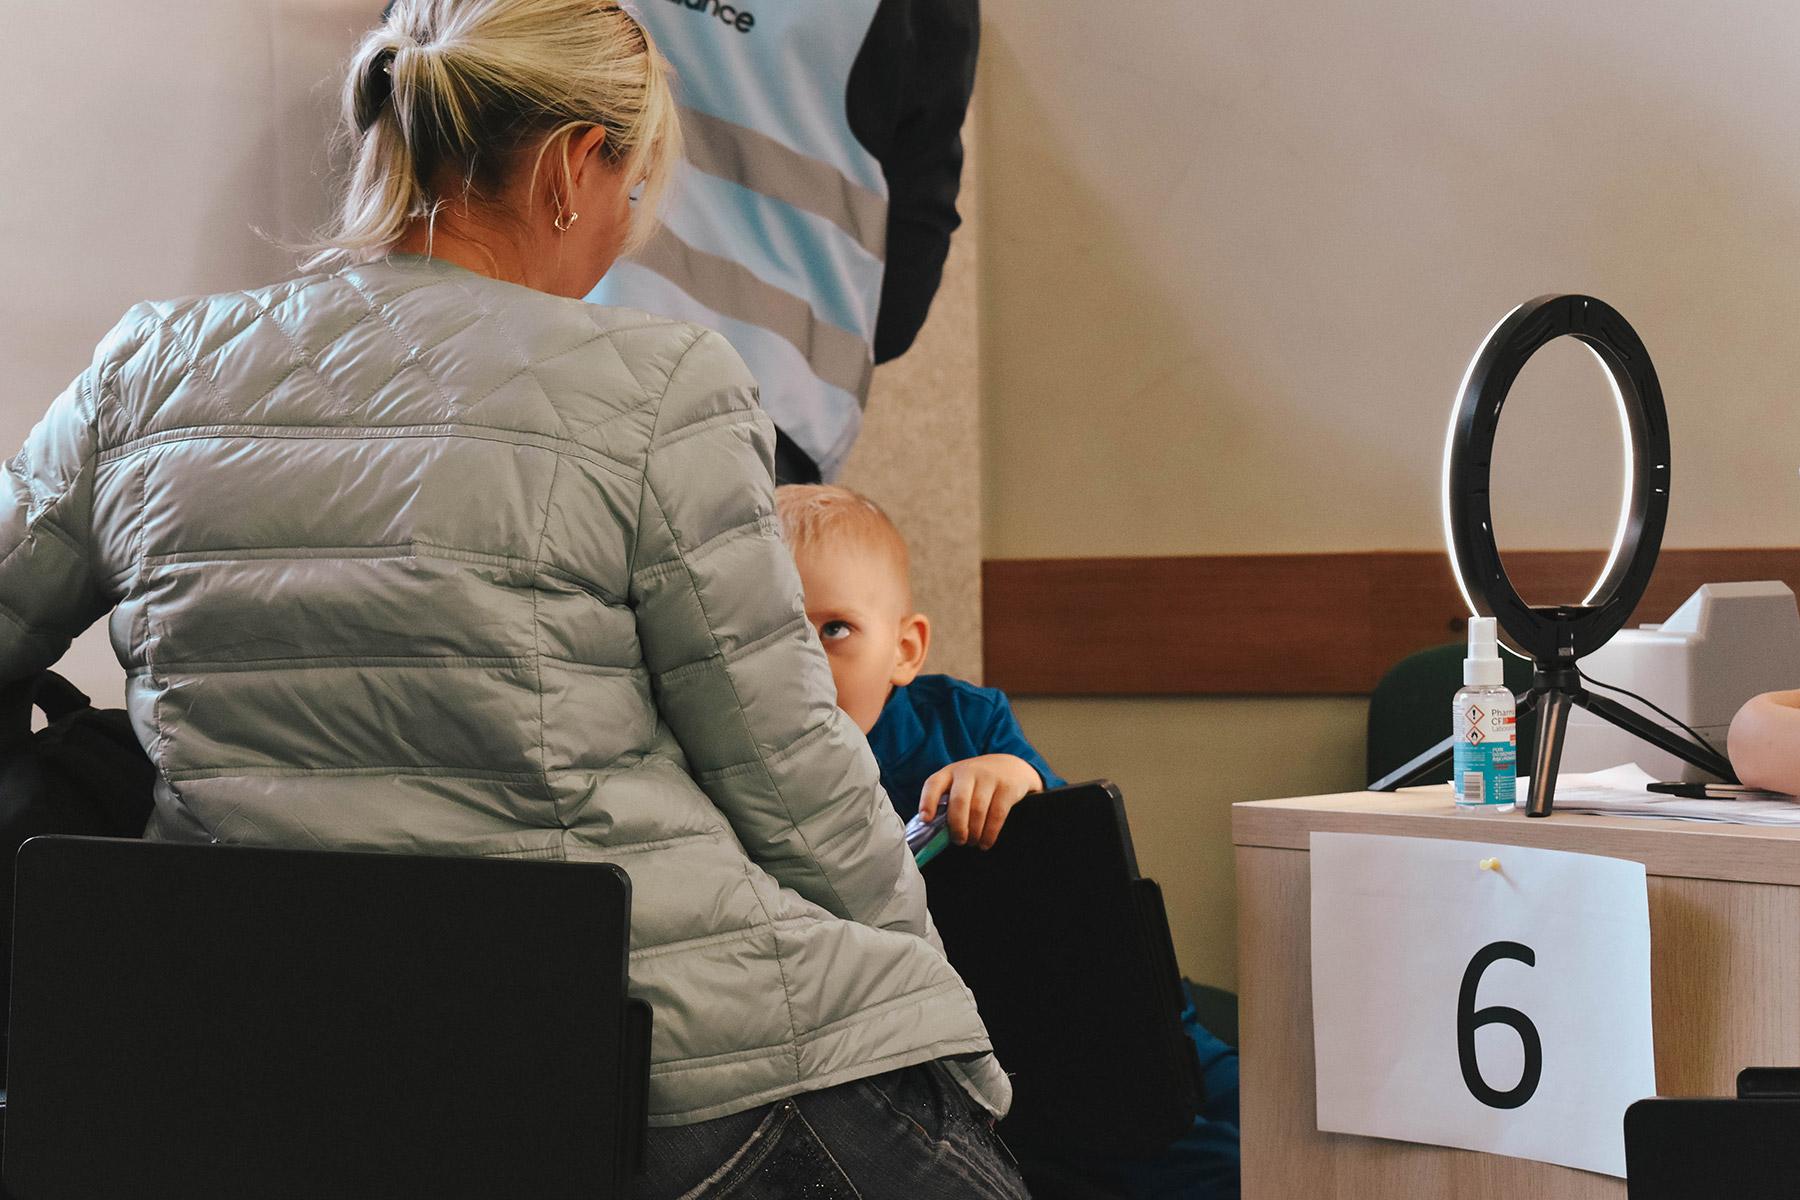 A woman and her son register at the enrolment stations in the Gdansk refugee center. Photo: LWF/ Krysztof Tylicki